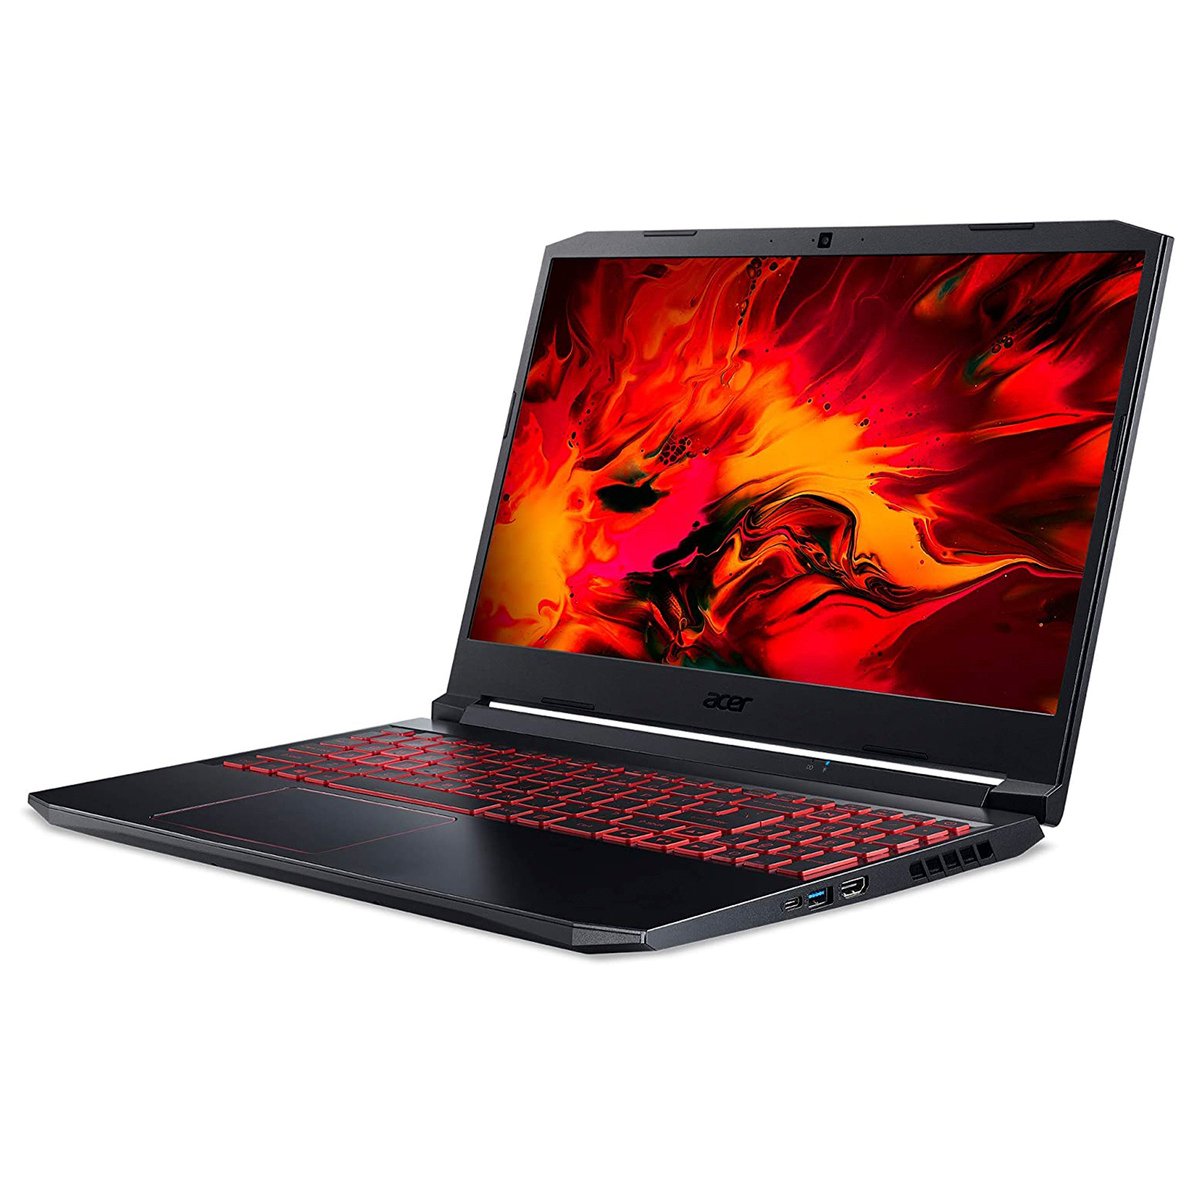 Acer Nitro5 AN515-55 Gaming Notebook,Core i5-10300H,8GB, 1TB SSD,4GB Graphics, 15.6" FHD,Black